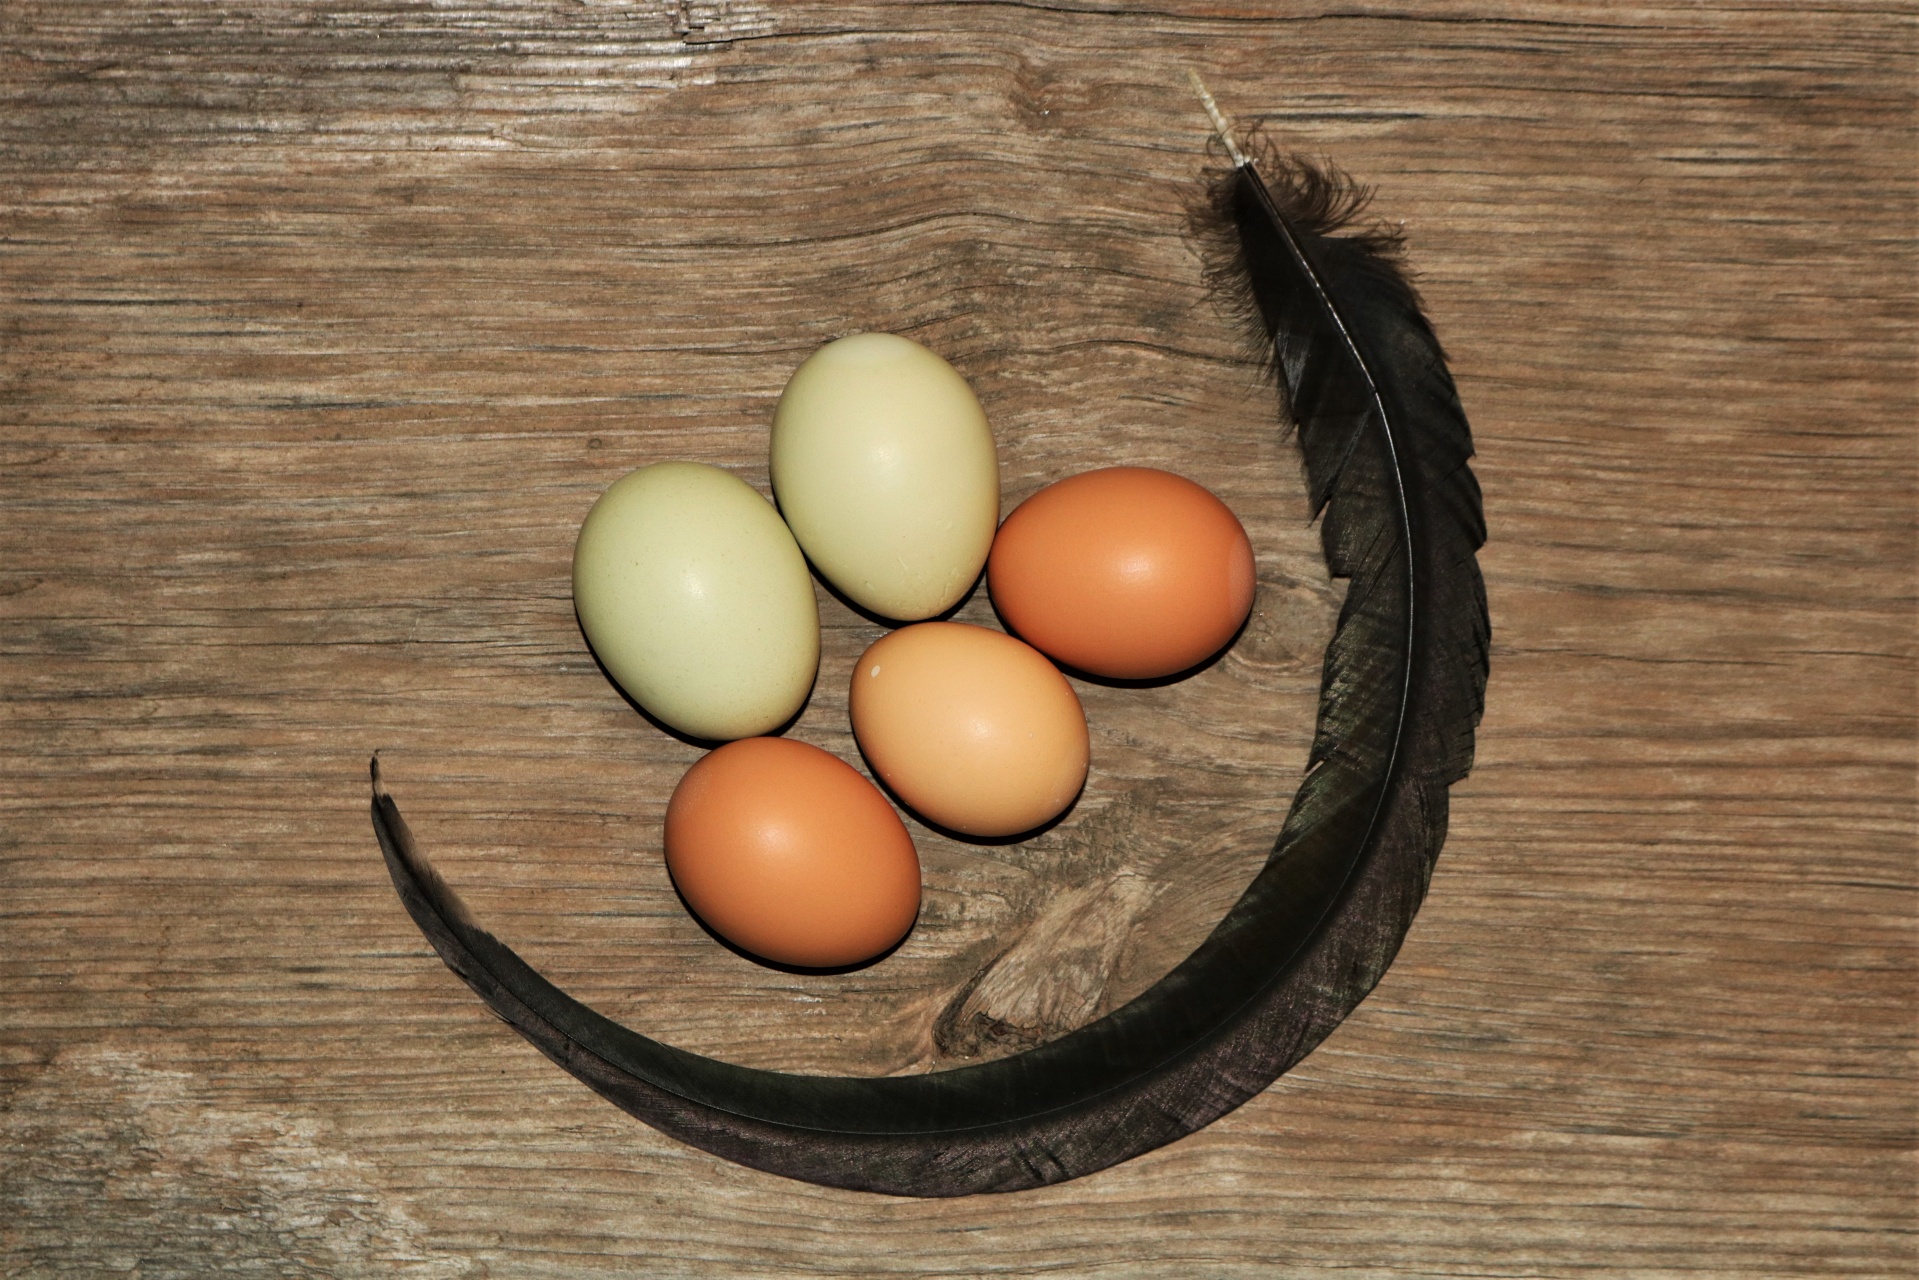 Green and brown farm fresh eggs, with a long black chicken feather curled around them, arranged on a wooden background.